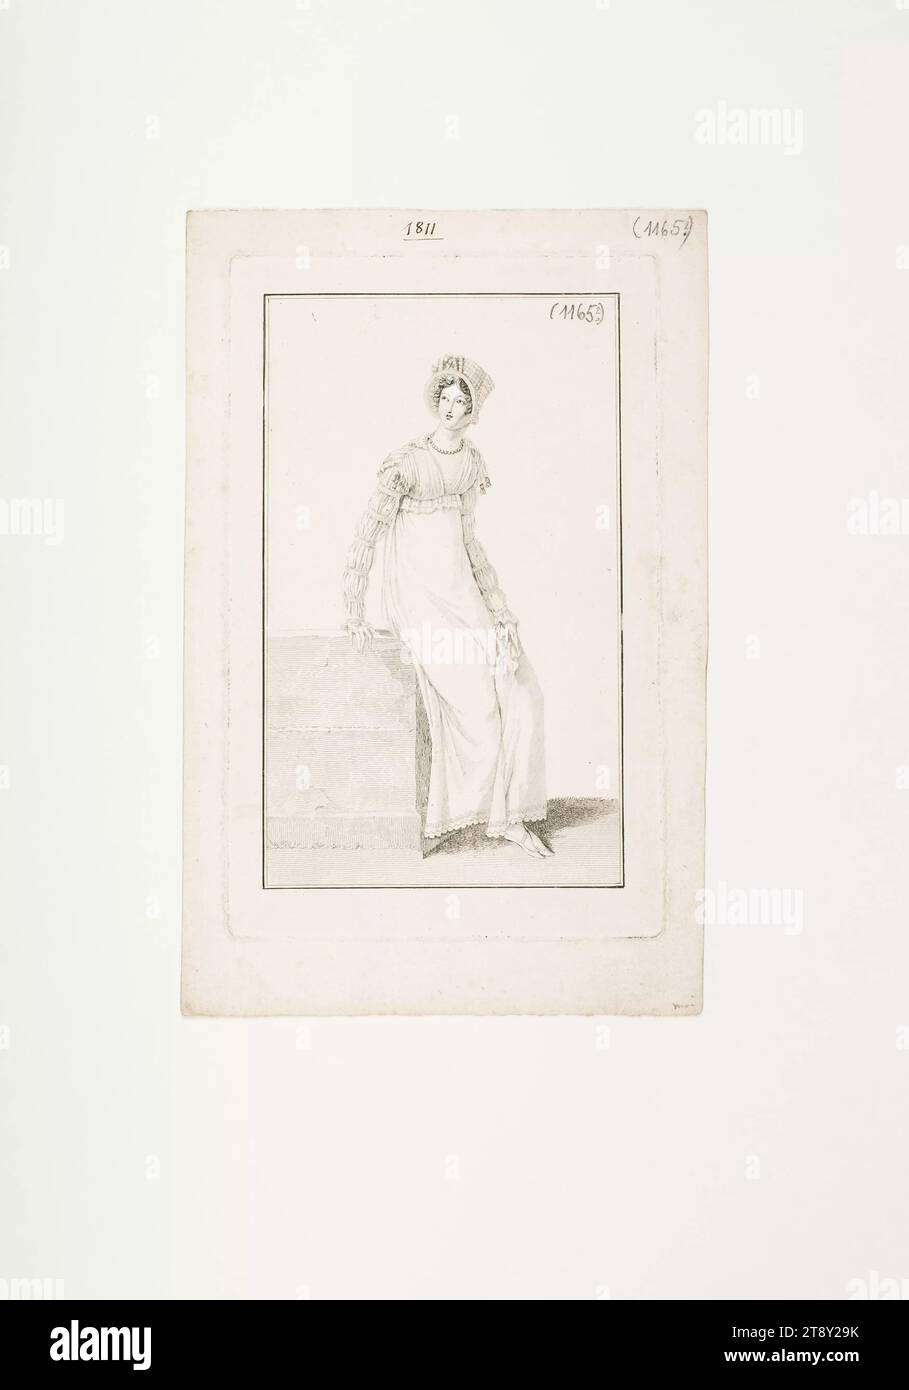 Fashion picture: 'Parisian woman with hat and gown sitting on a stone block', Unknown, 1811, paper, colorised, copperplate engraving, height 20, 9 cm, width 13, 5 cm, plate size 15, 3×9, 4 cm, height: Plate measure 15, 3 cm, width: Plate size 9, 4 cm, fashion, bourgeoisie, fashion plates, head-gear, woman, dress, gown, The Vienna Collection Stock Photo